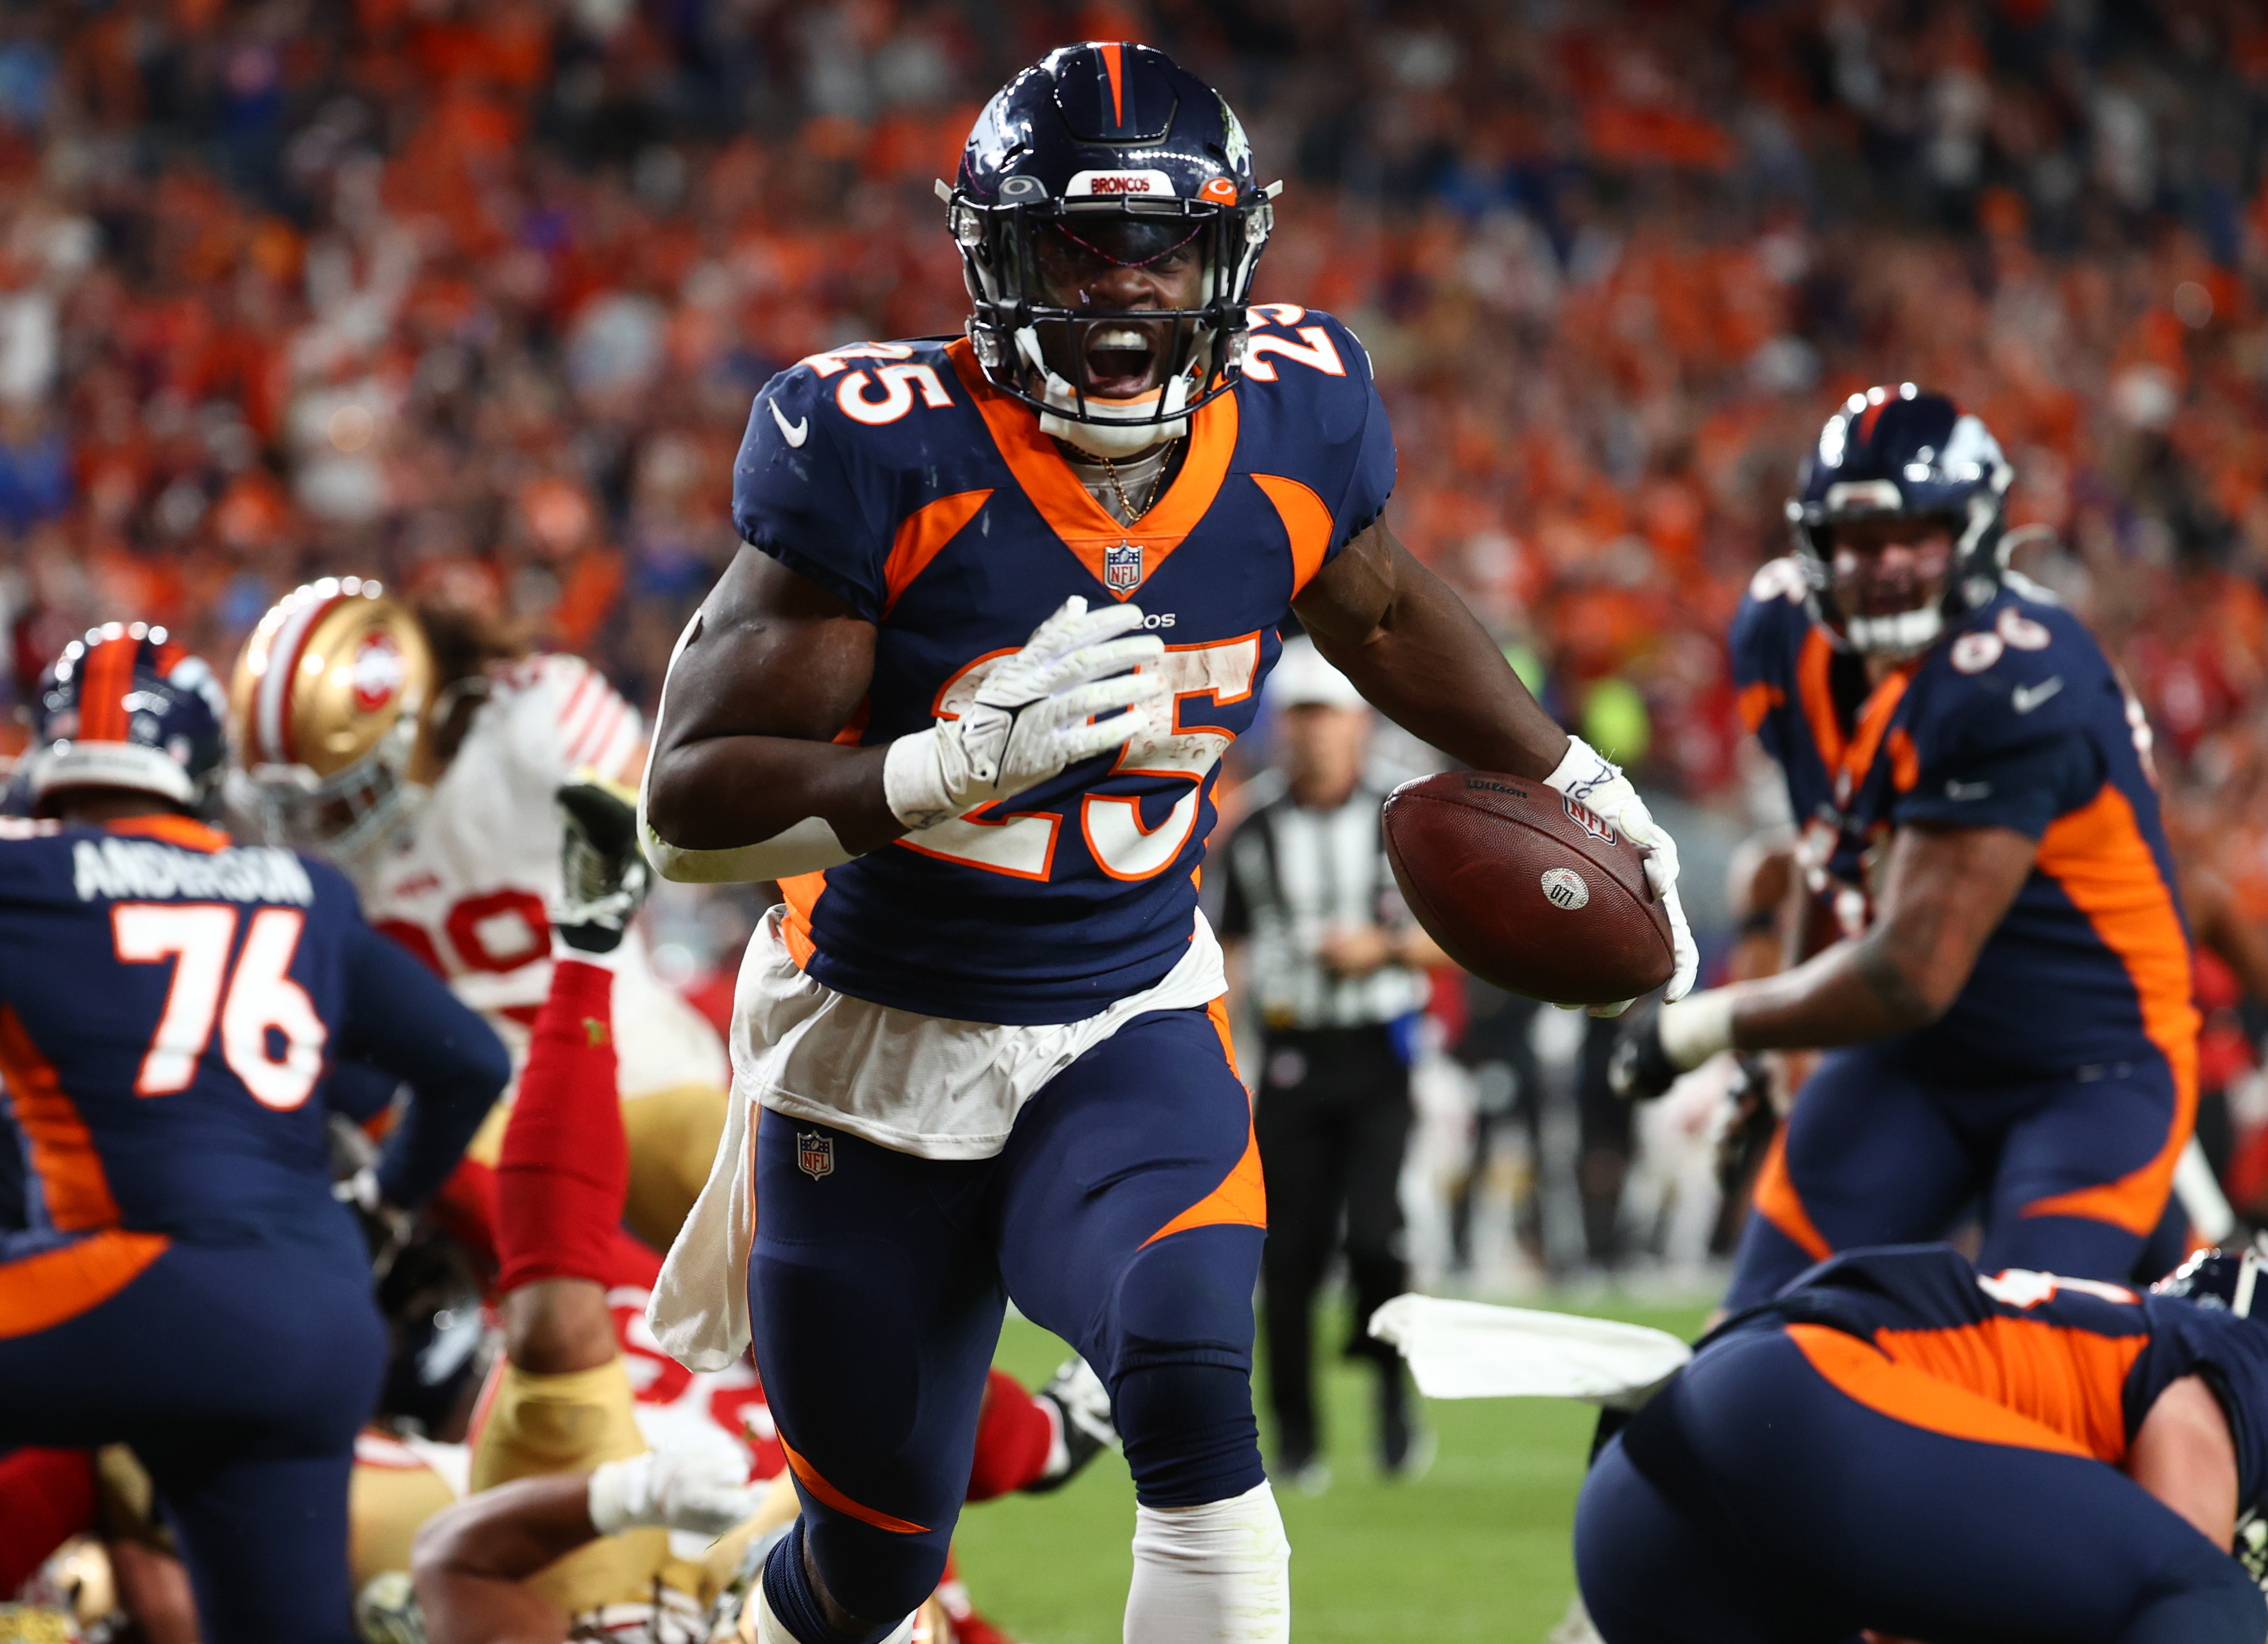 Melvin Gordon III #25 of the Denver Broncos rushes during the fourth quarter against the San Francisco 49ers at Empower Field At Mile High on September 25, 2022 in Denver, Colorado.